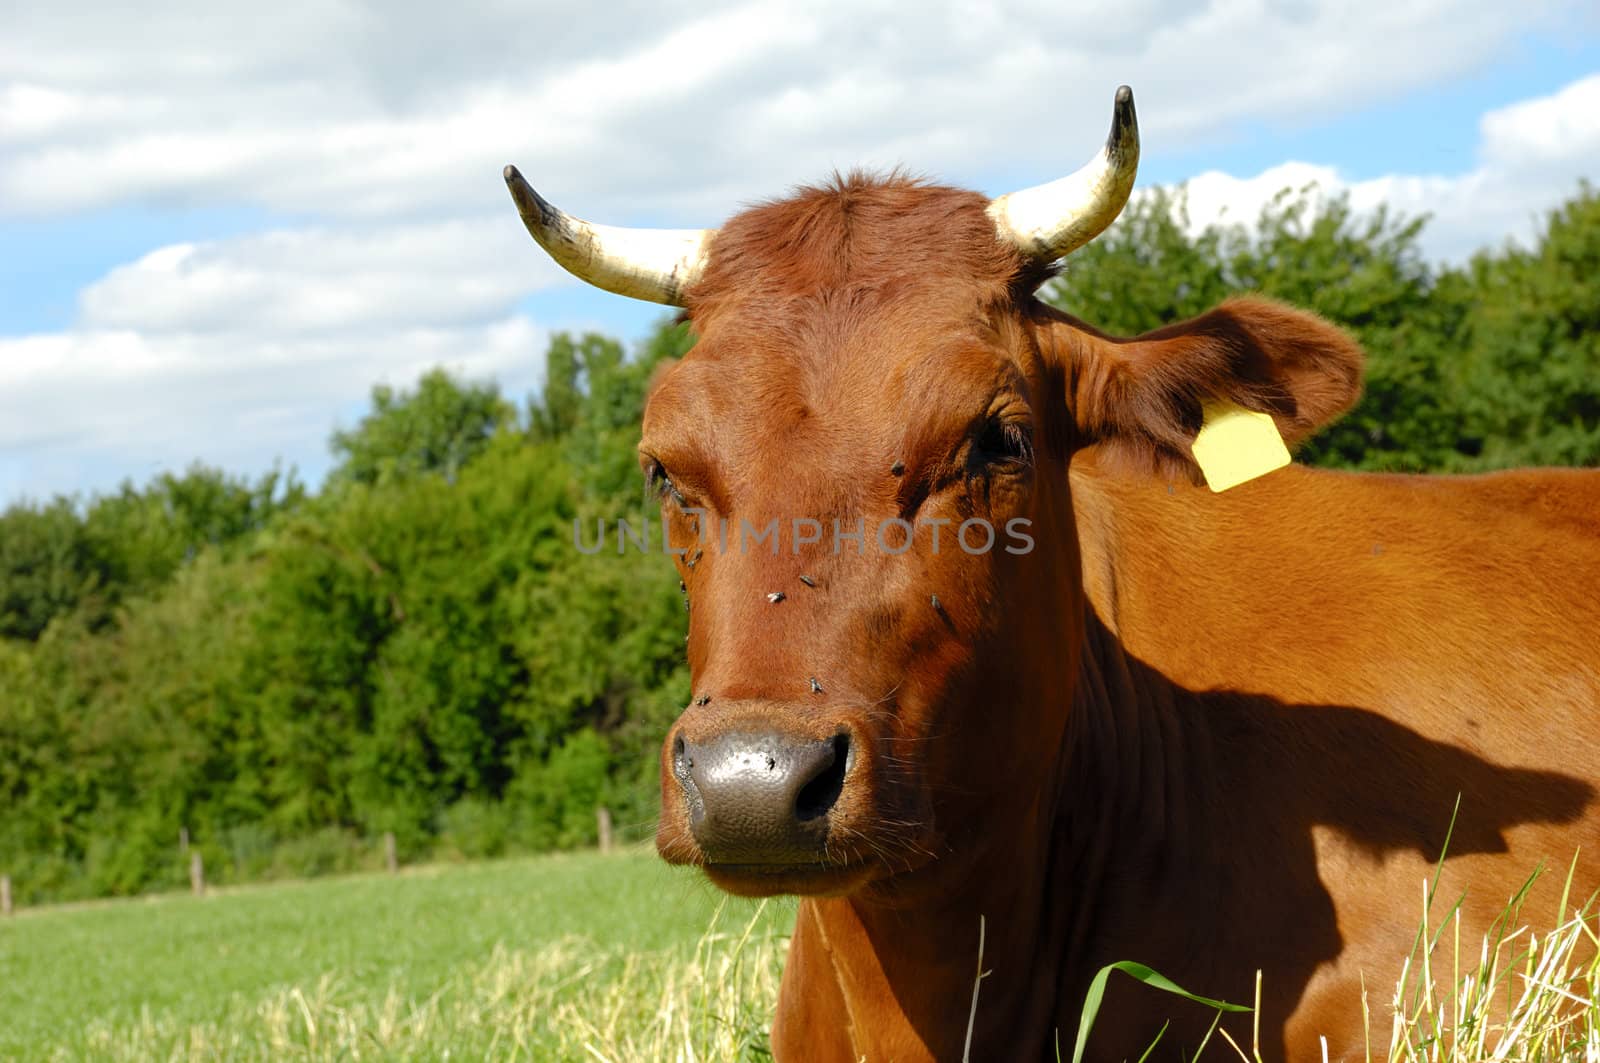 Face of a resting cow. The sky is blue with white clouds.